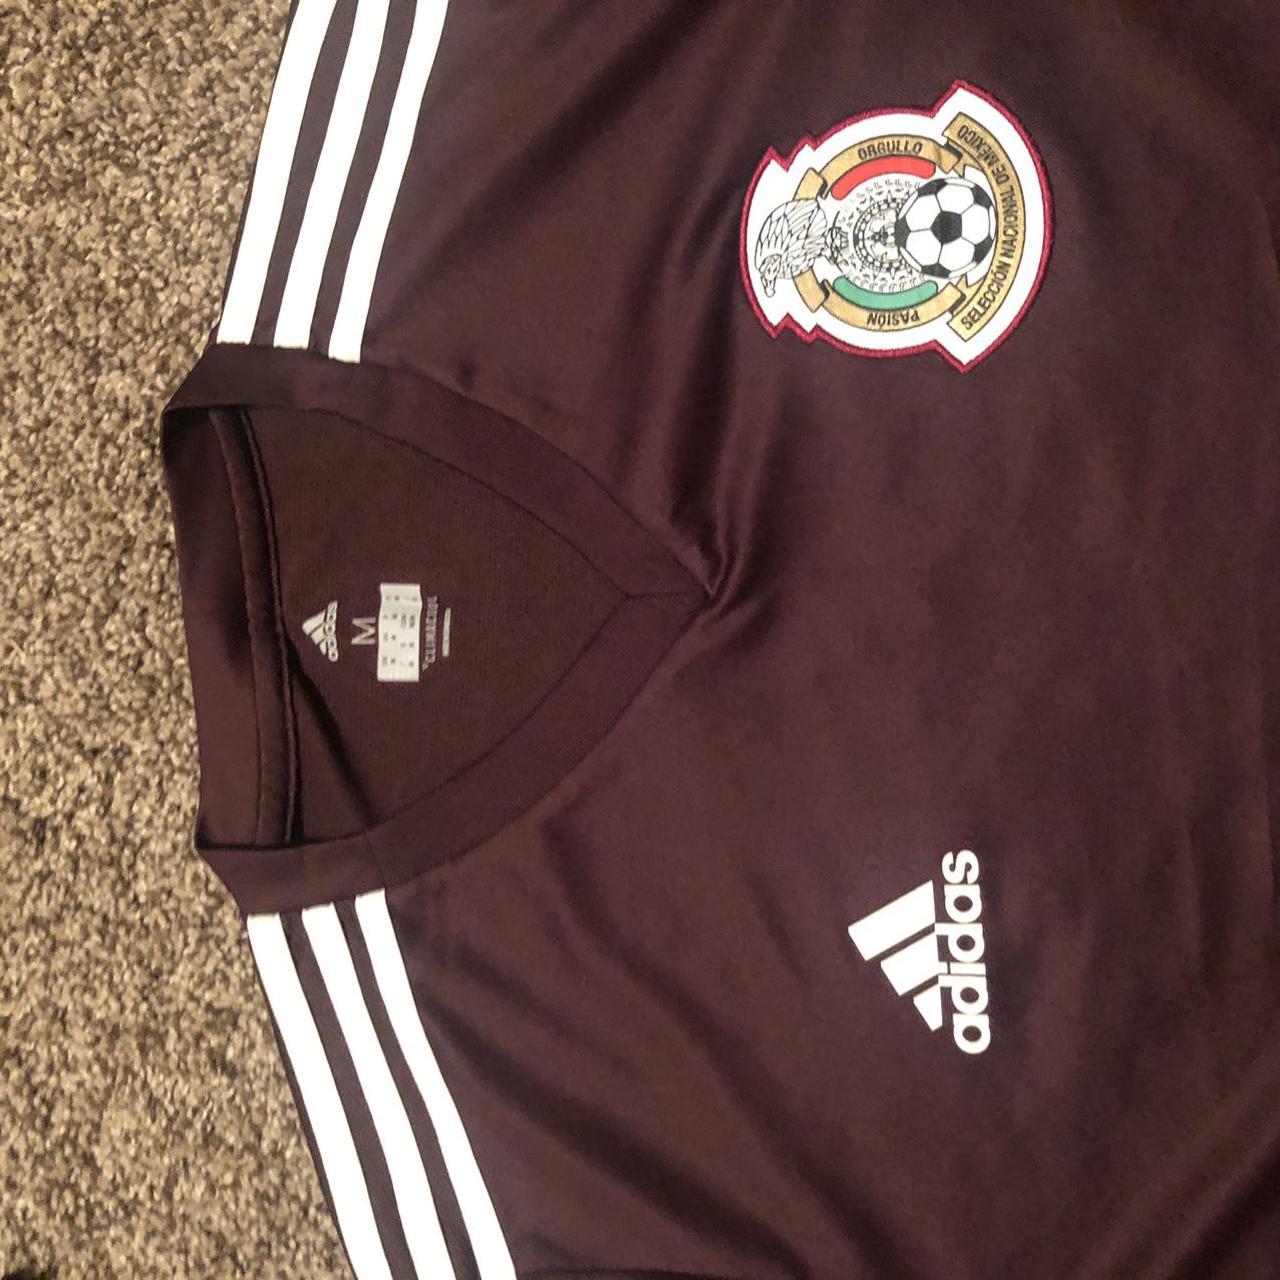 Mexico soccer jersey ♻️ABOUT THE ITEM: Seleccion - Depop